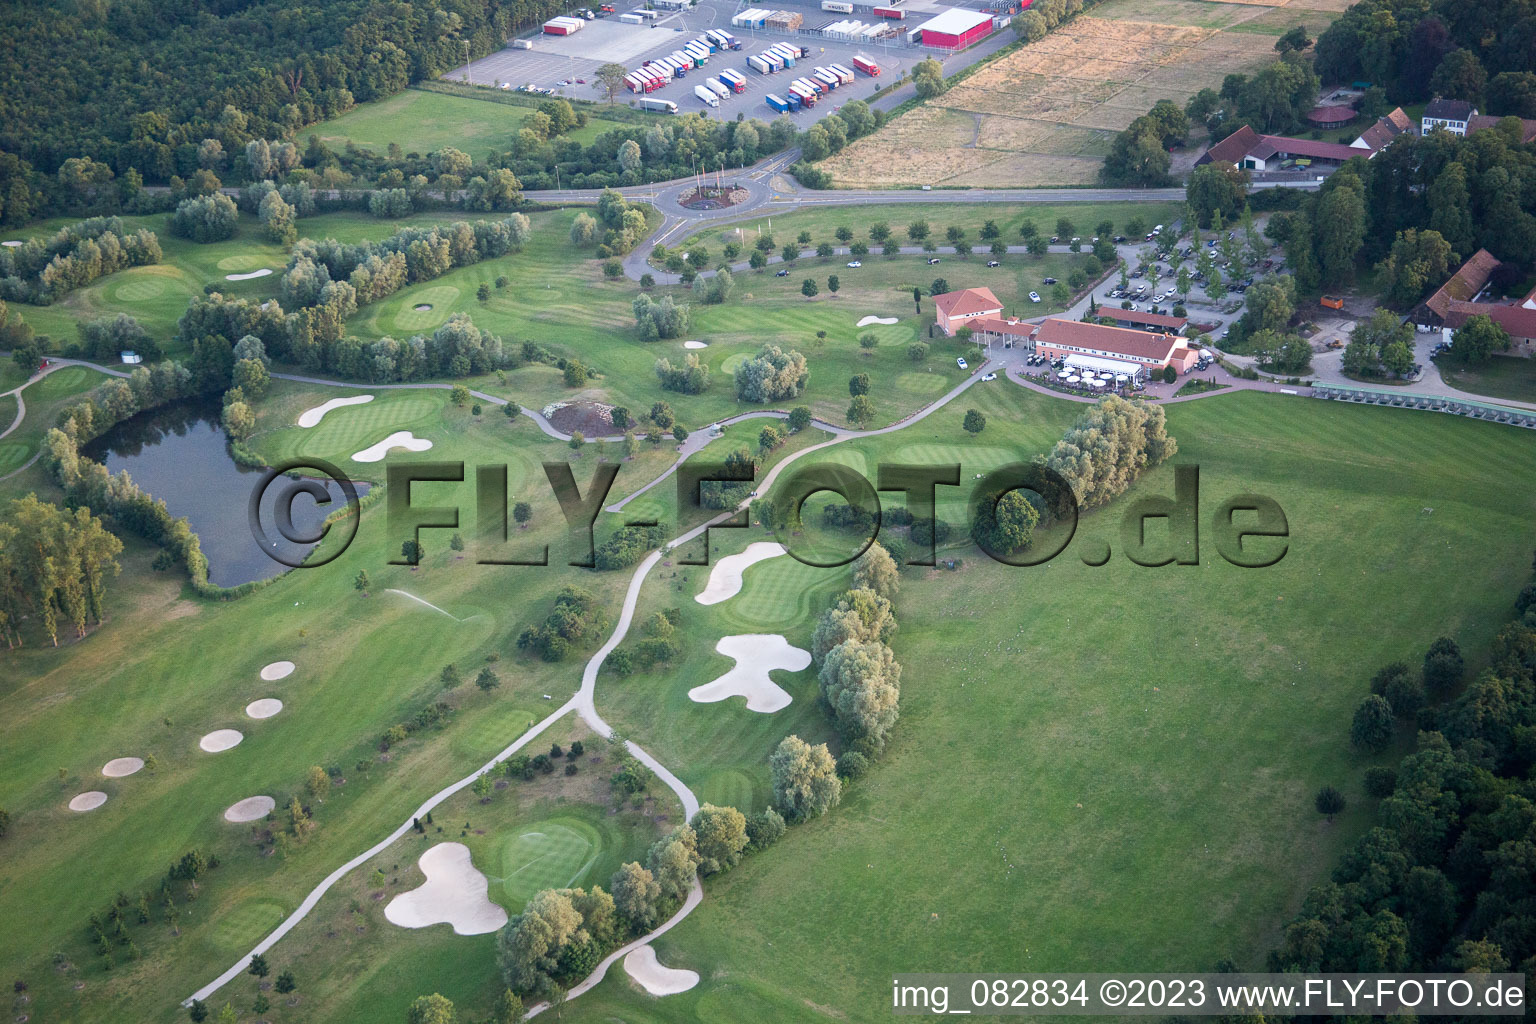 Dreihof Golf Club in Essingen in the state Rhineland-Palatinate, Germany out of the air